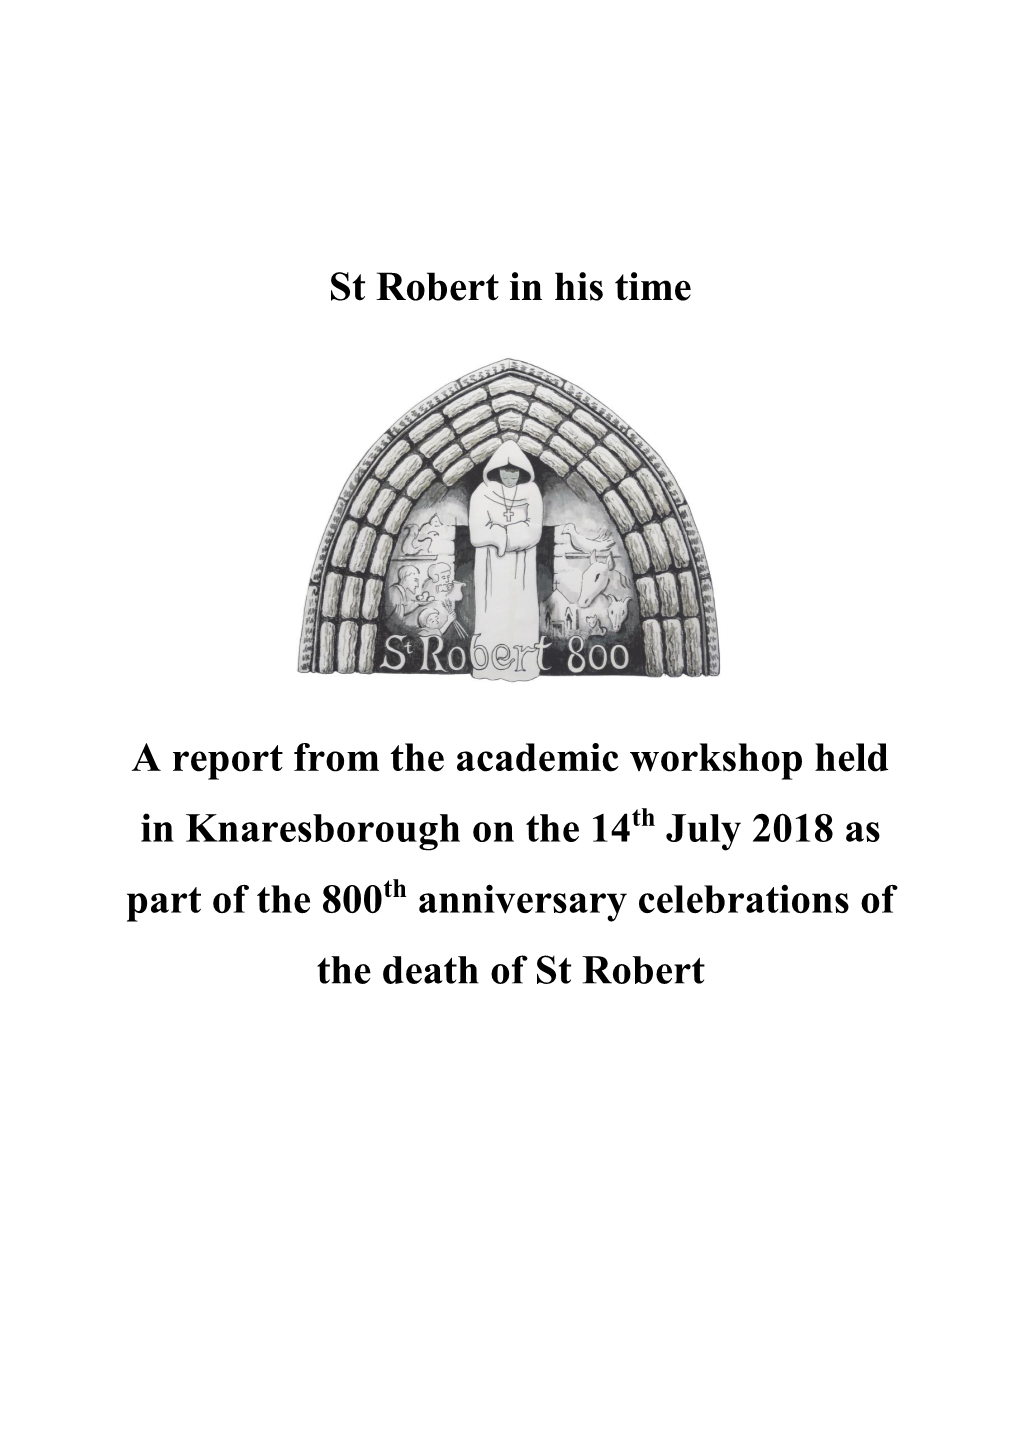 St Robert in His Time a Report from the Academic Workshop Held in Knaresborough on the 14 July 2018 As Part of the 800 Anniversa